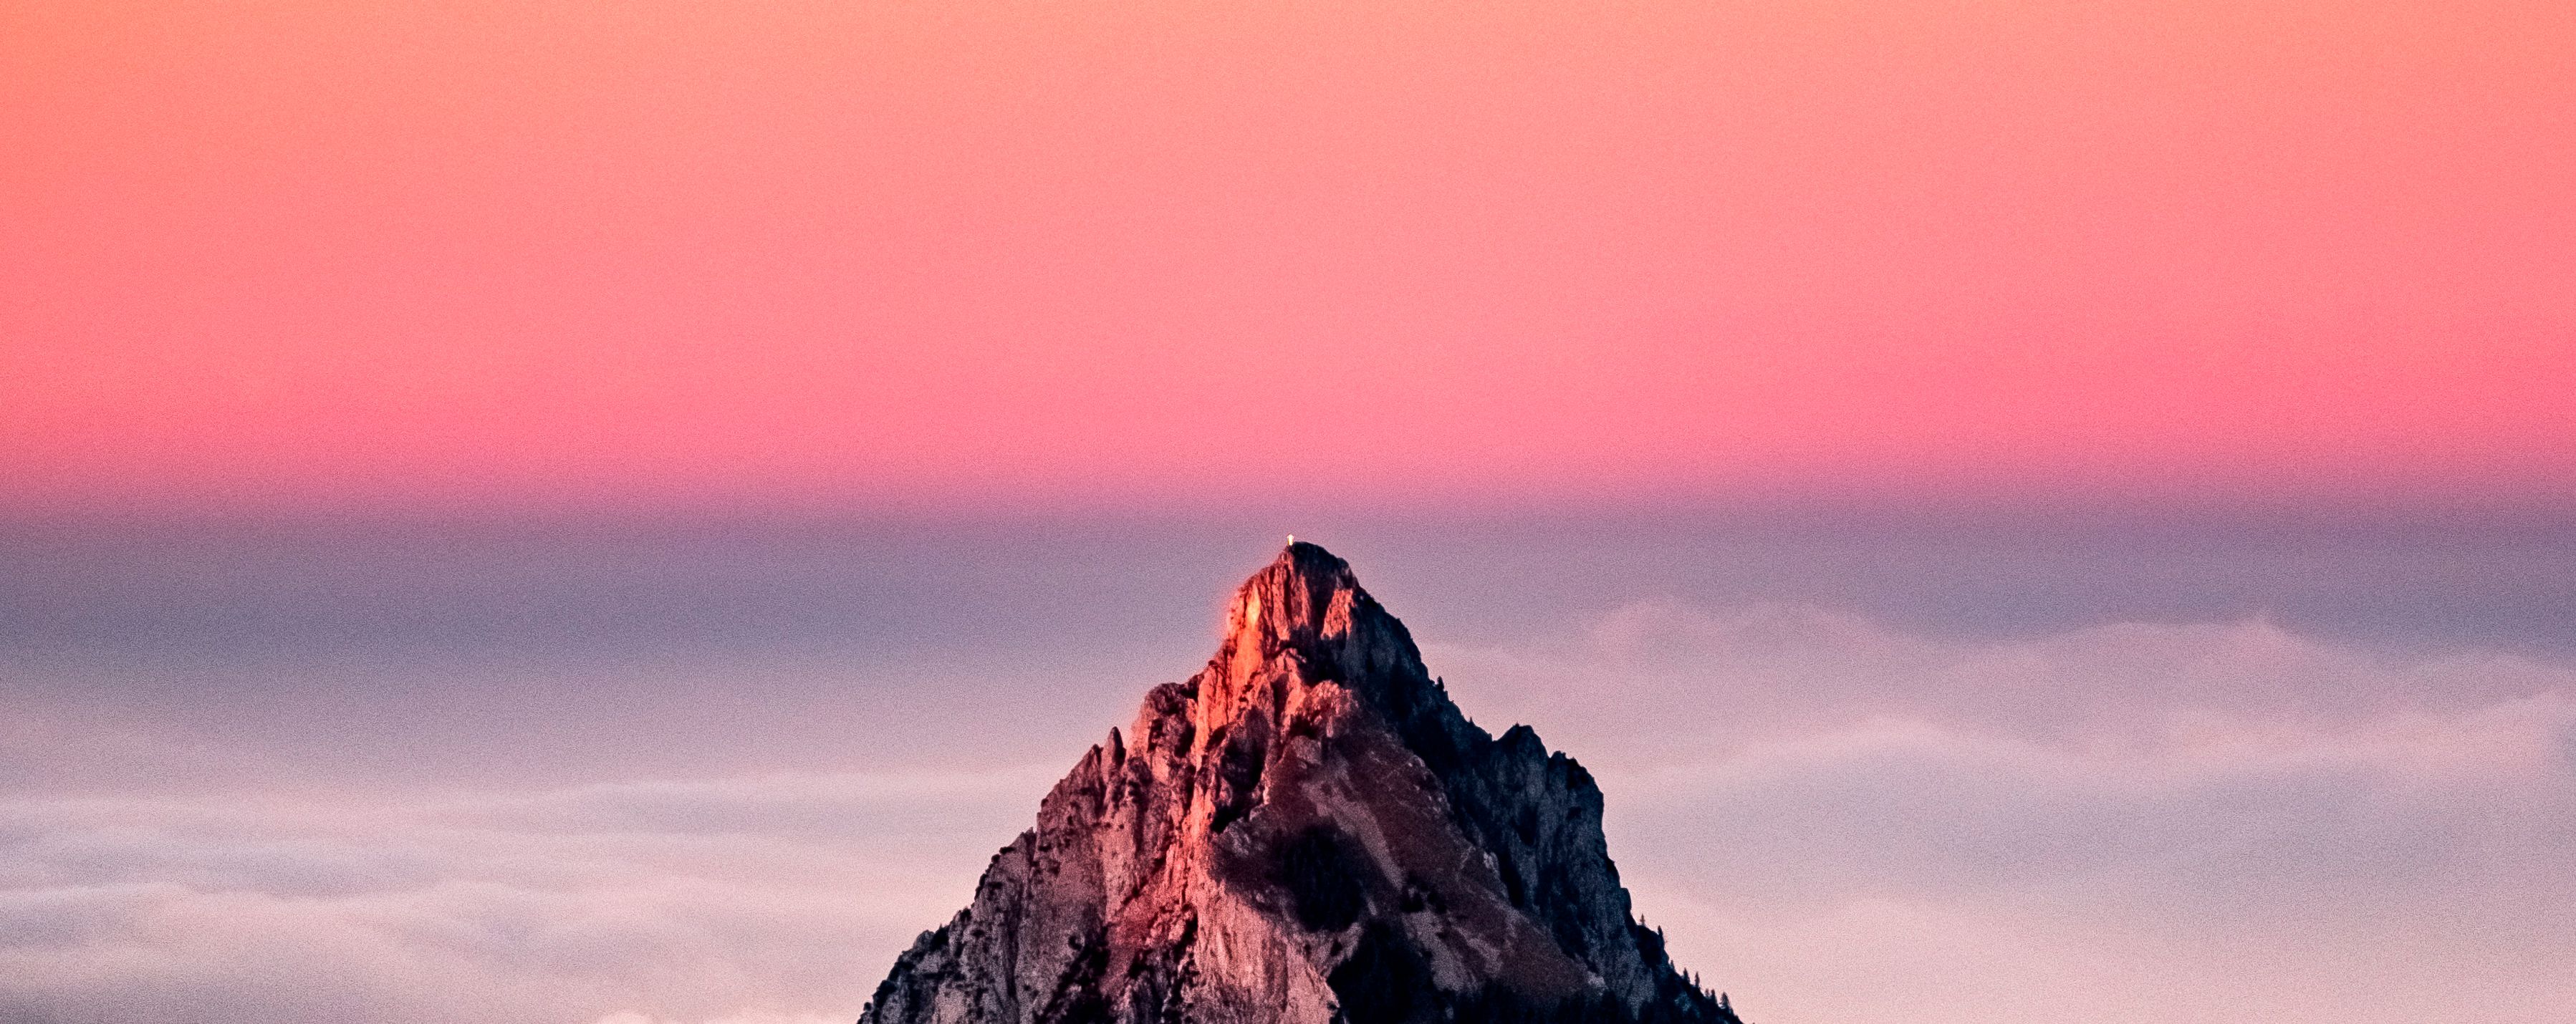 Aerial View Mountain Covered Fog Beautiful Pink Sky Edit